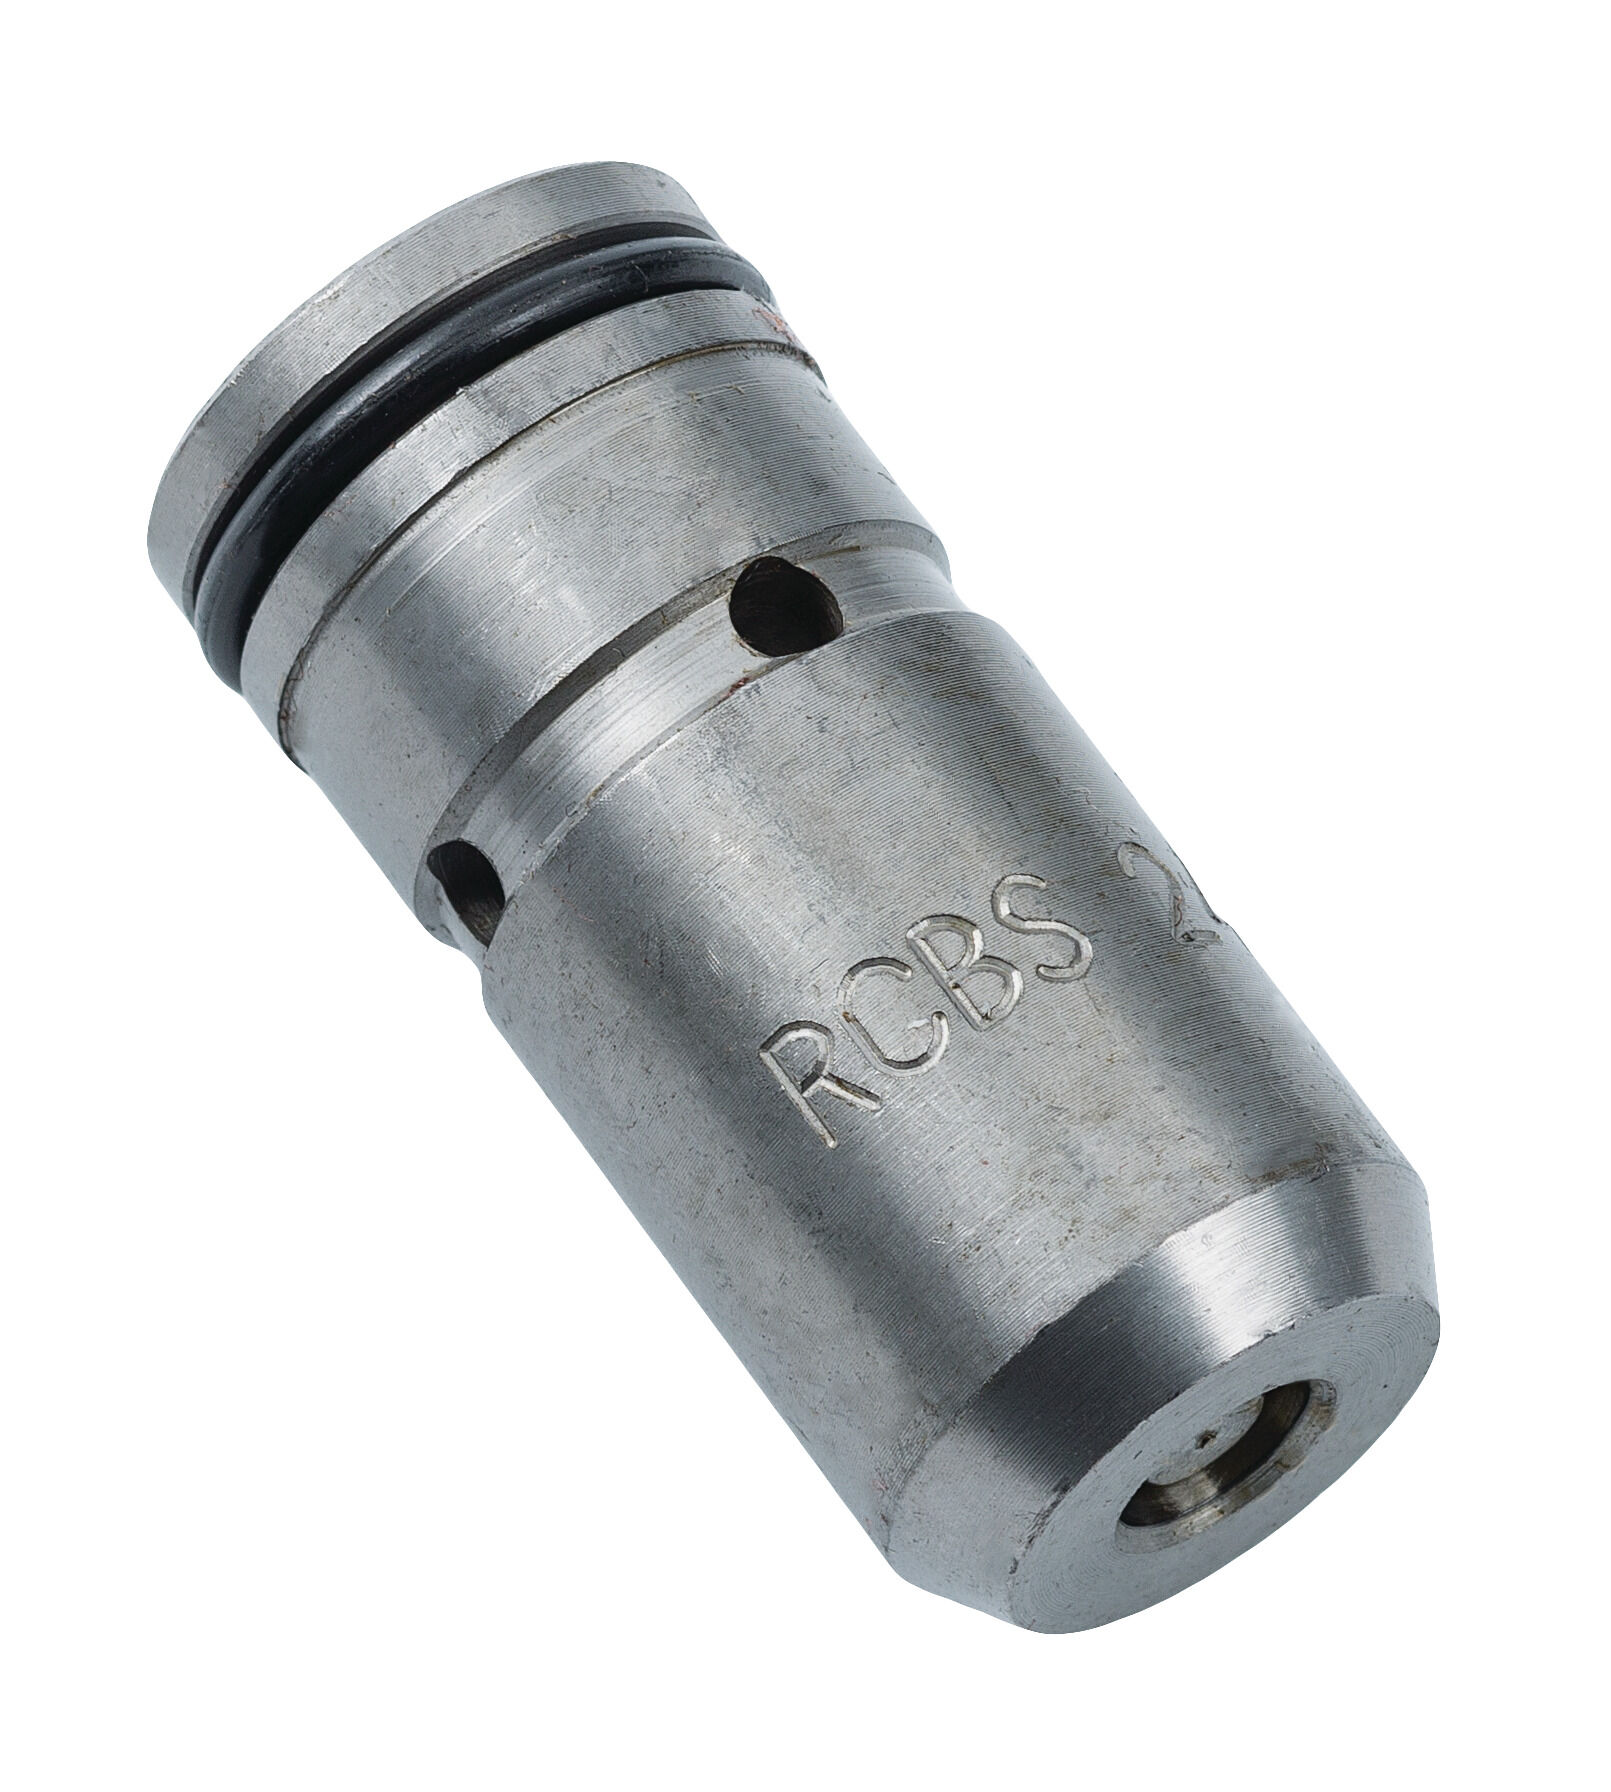 410N Lyman Or RCBS Bullet Sizing Top Punch For 450 Lubrisizer Or Lube-A-Matic 